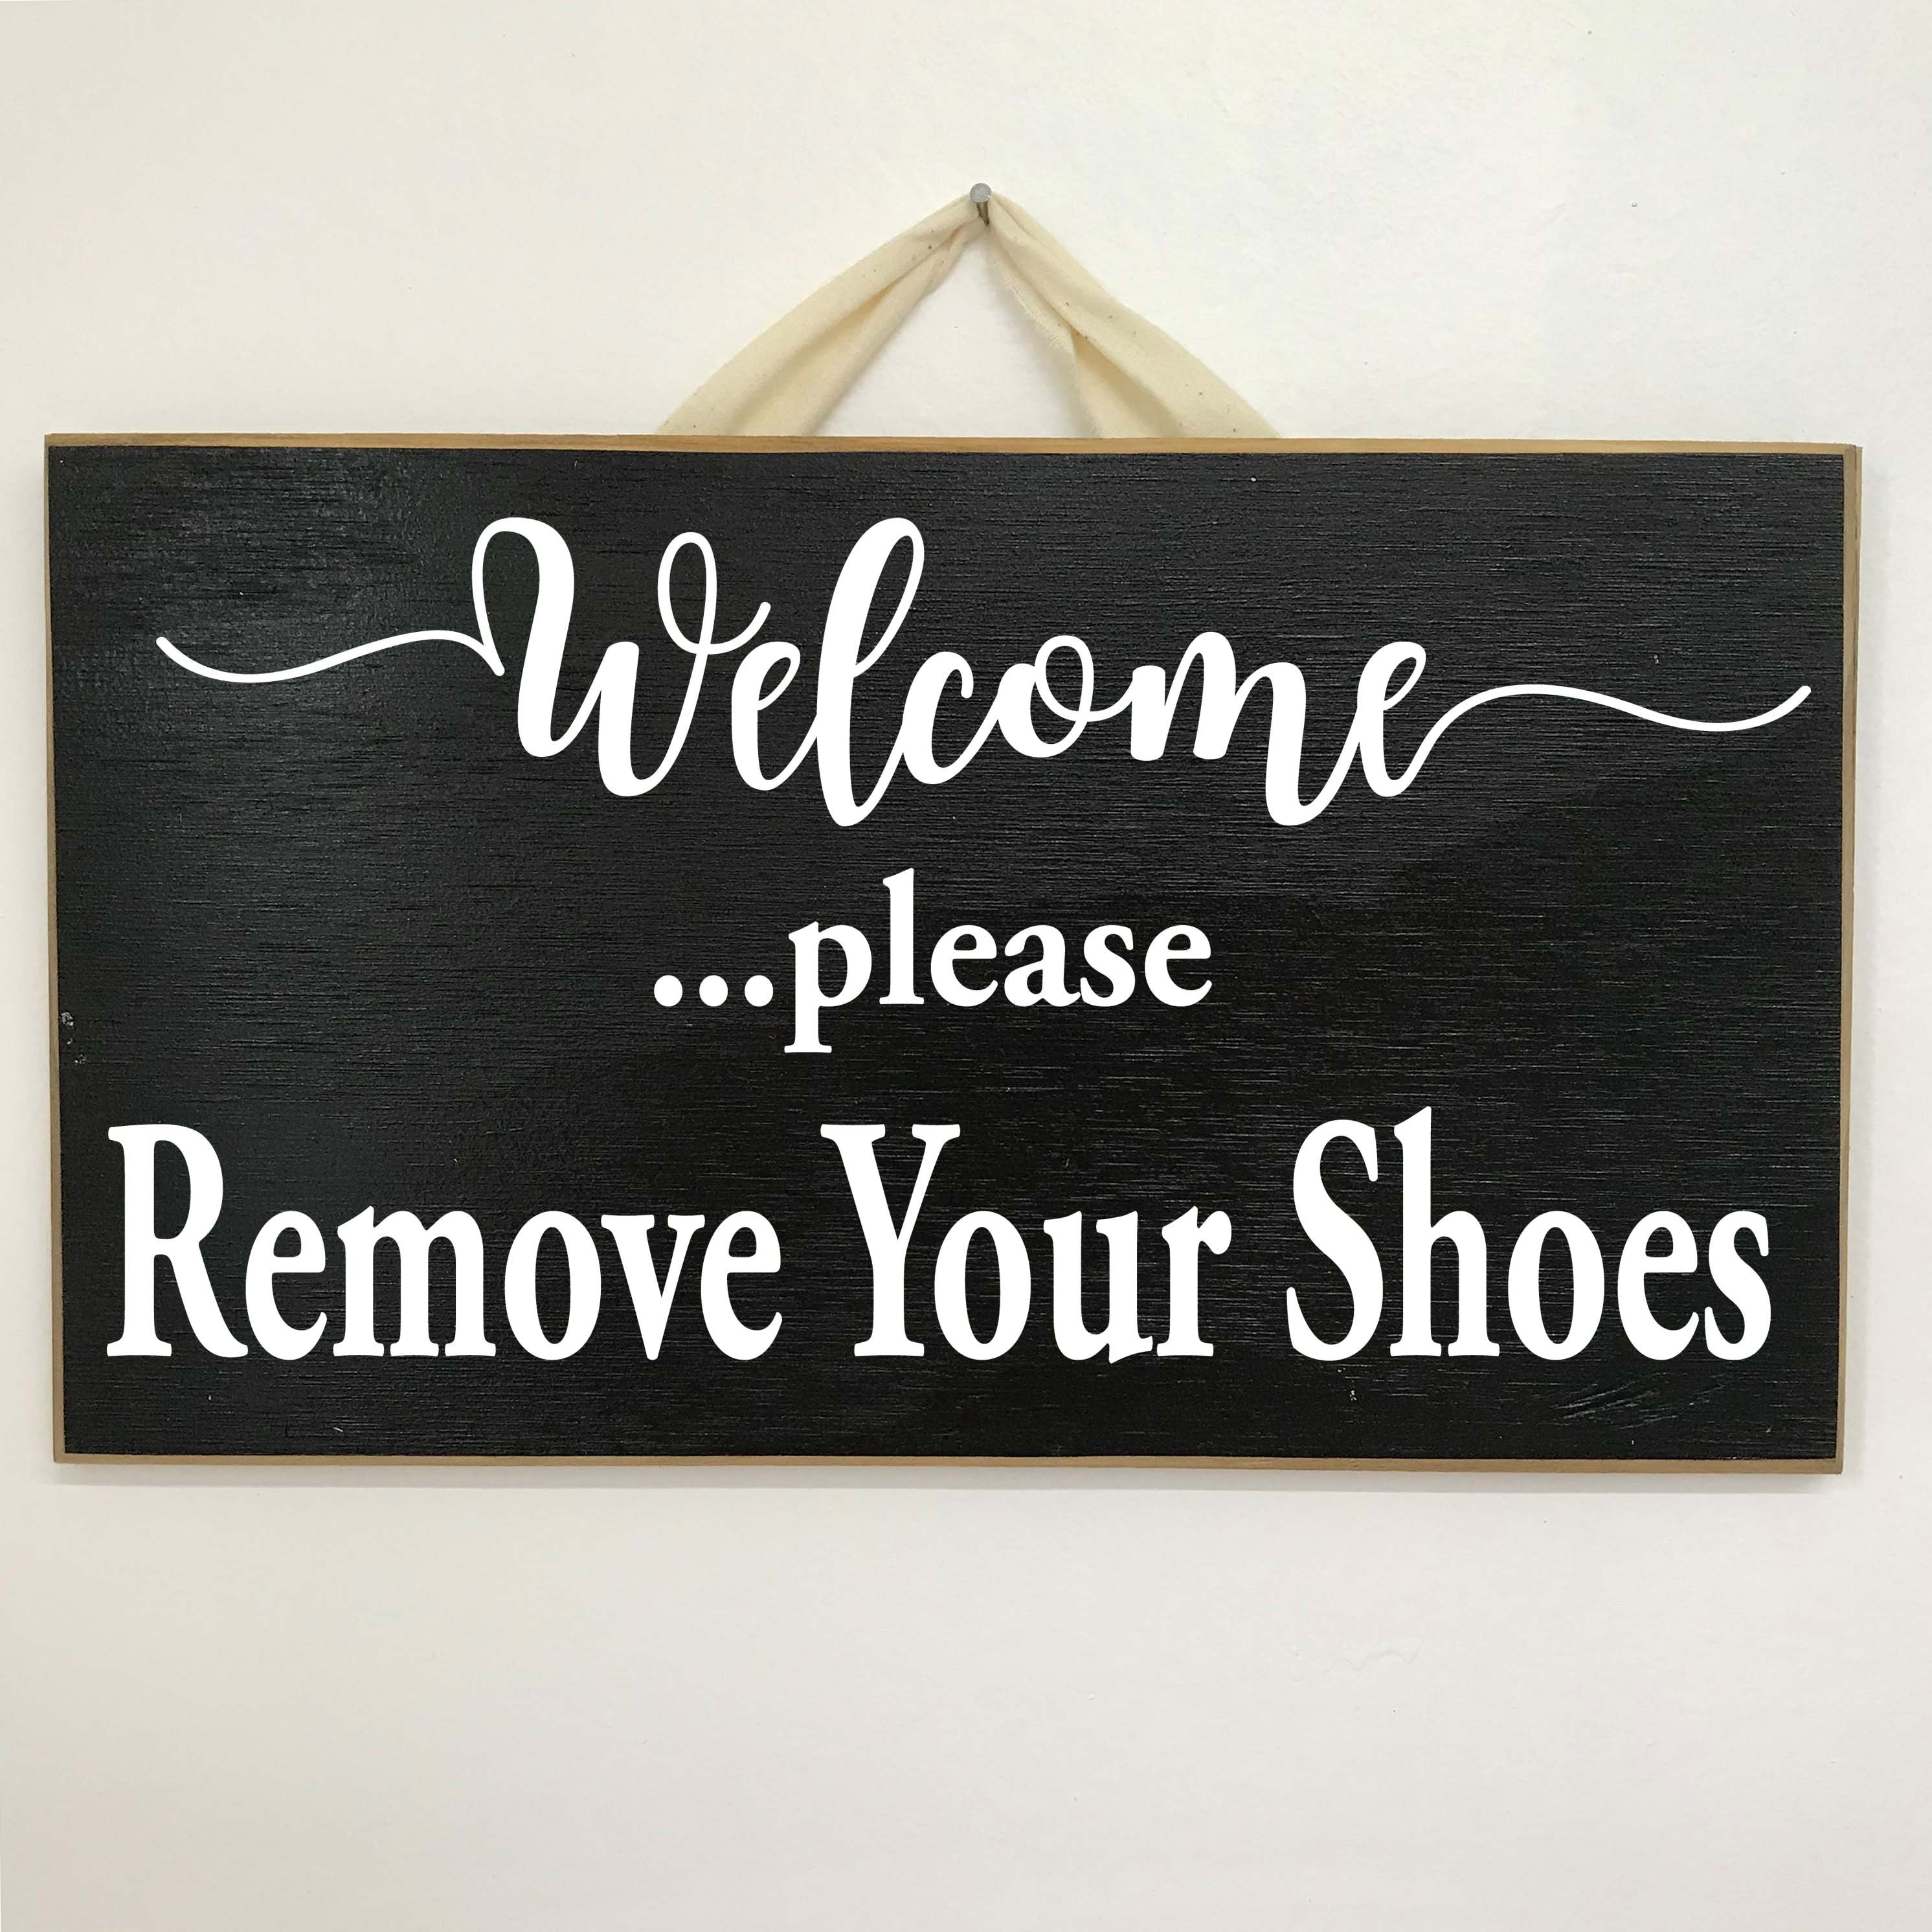 Remove Your Shoes Metal Sign Decorative Hanging Welcome Plaque Wall Art 